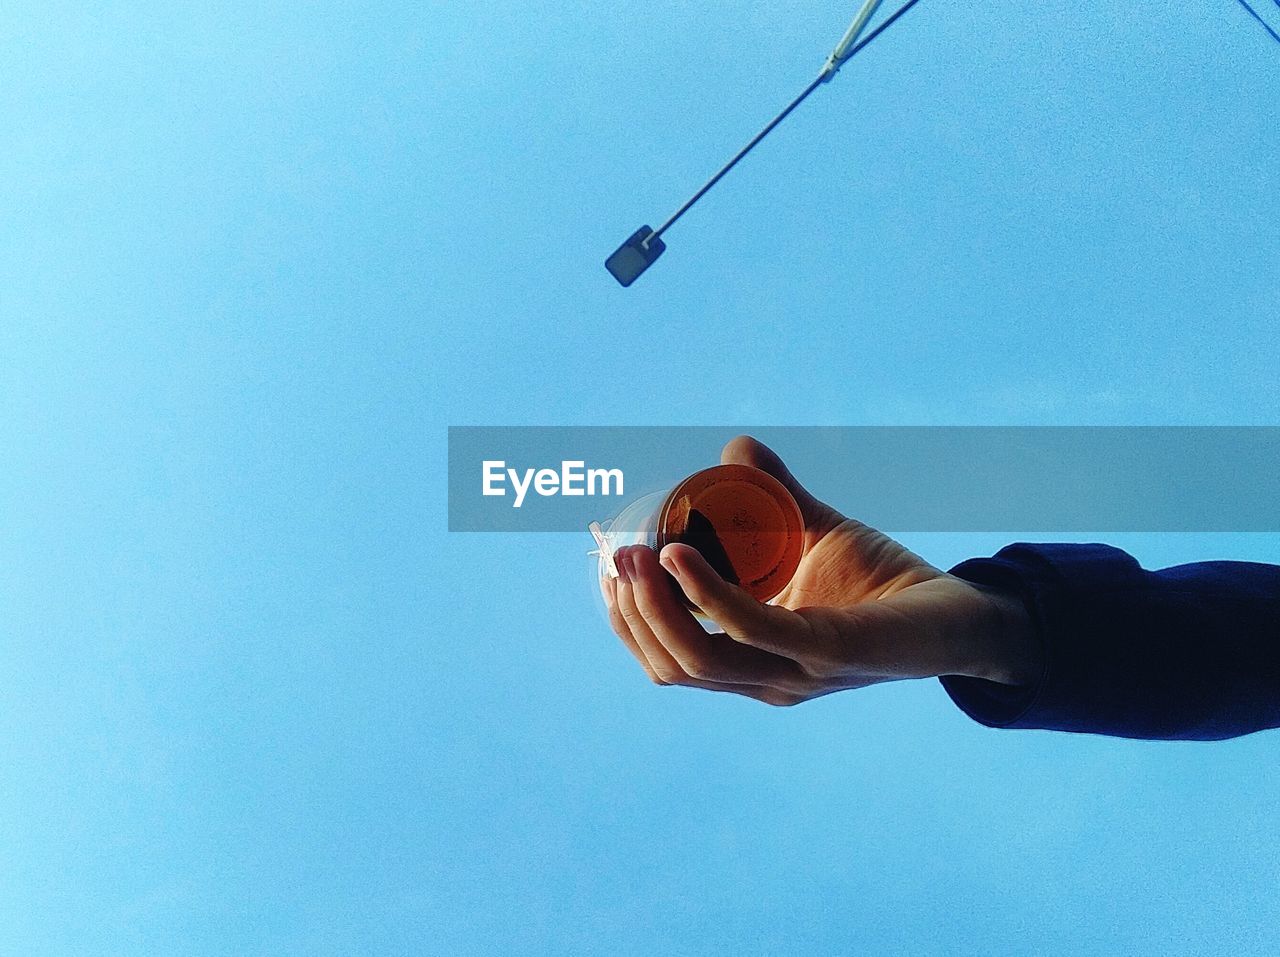 Low angle view of person hand against blue sky